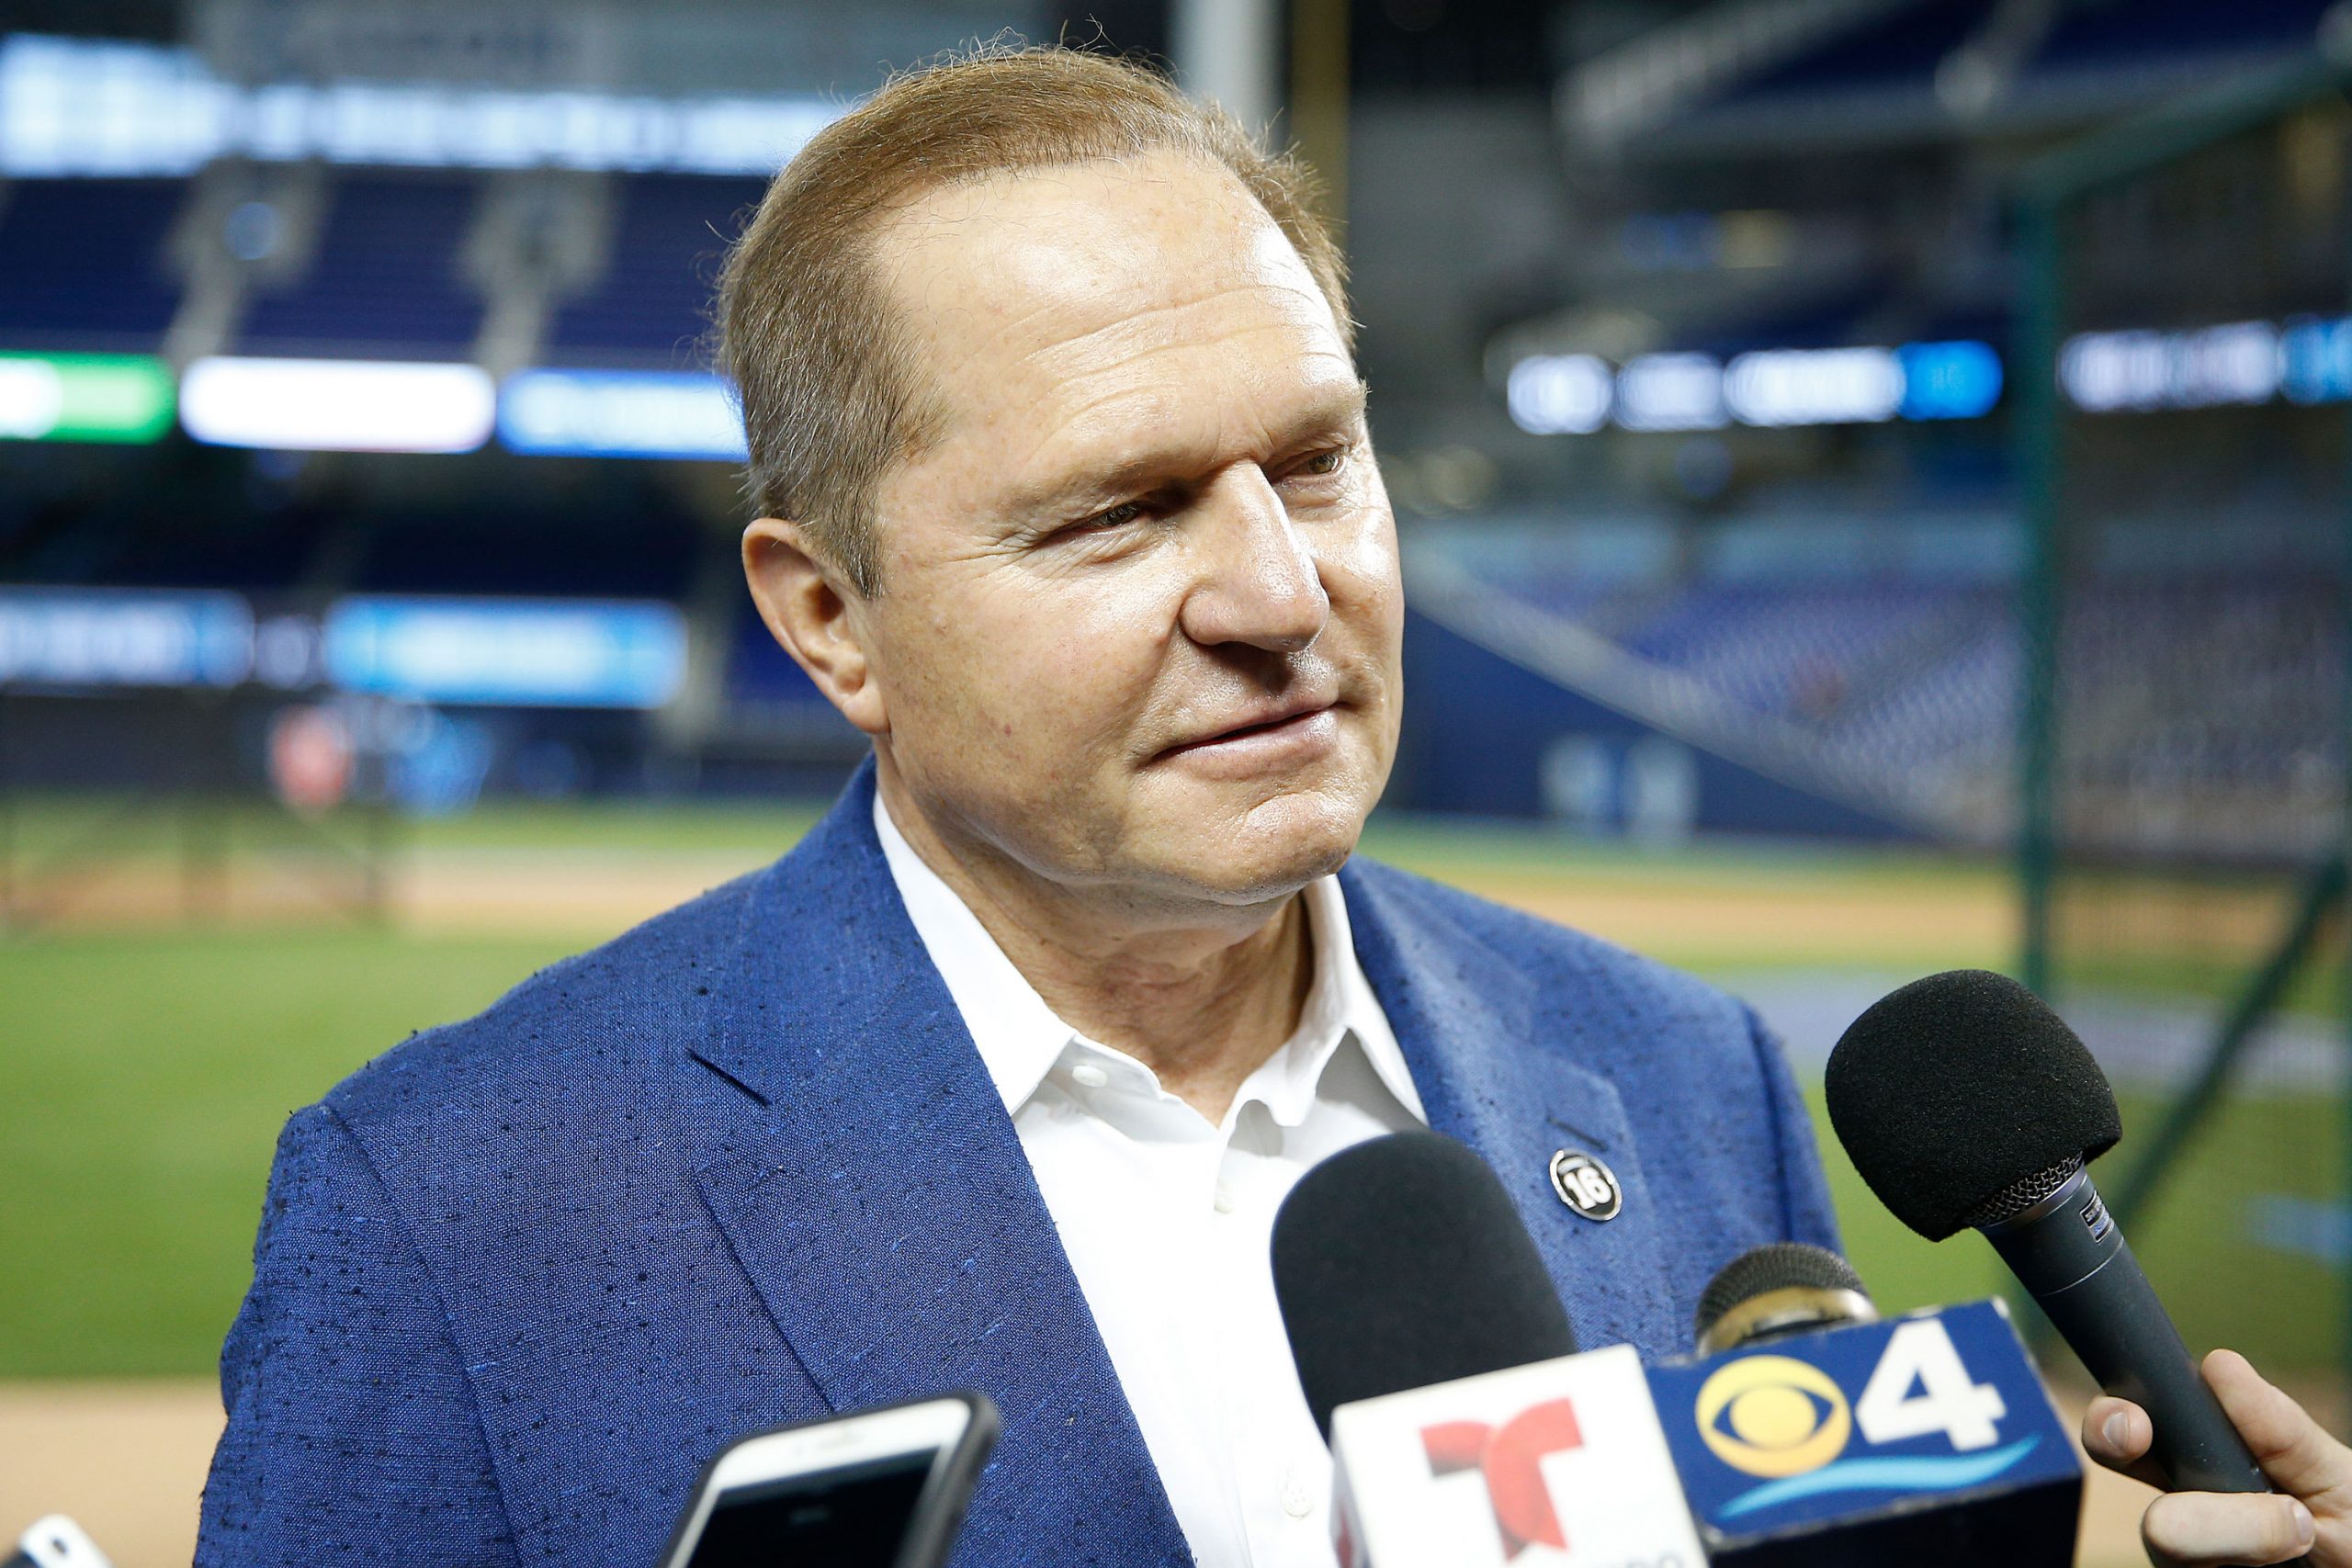 Agent Scott Boras says huge MLB contracts show Moneyball would not work